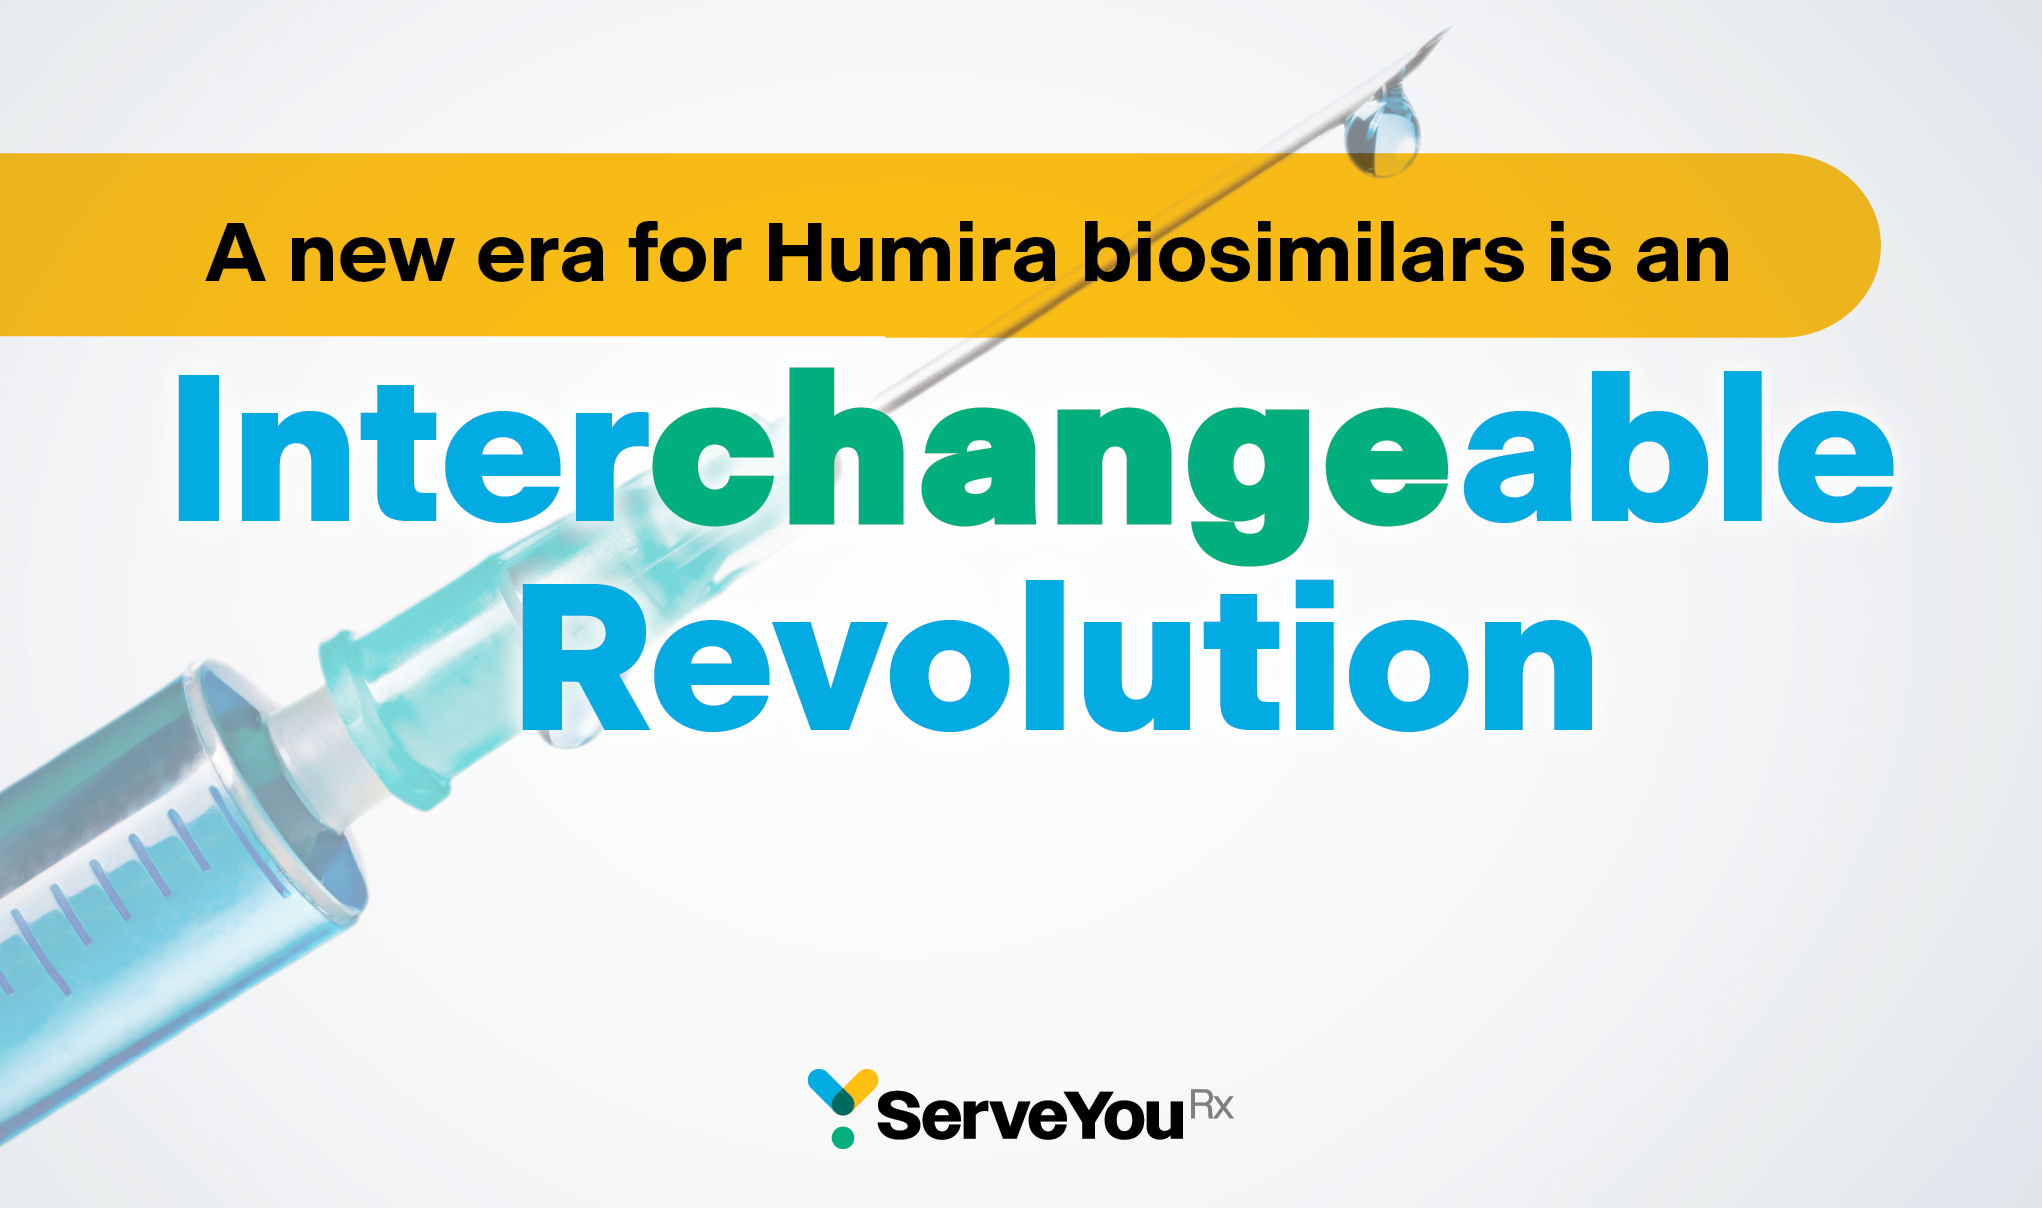 "A new era for Humira biosimilars is an Interchangeable Revolution" - article title in yellow, blue, and green overtop a needle, representing the drug Humira. Humira is an injectable medication.